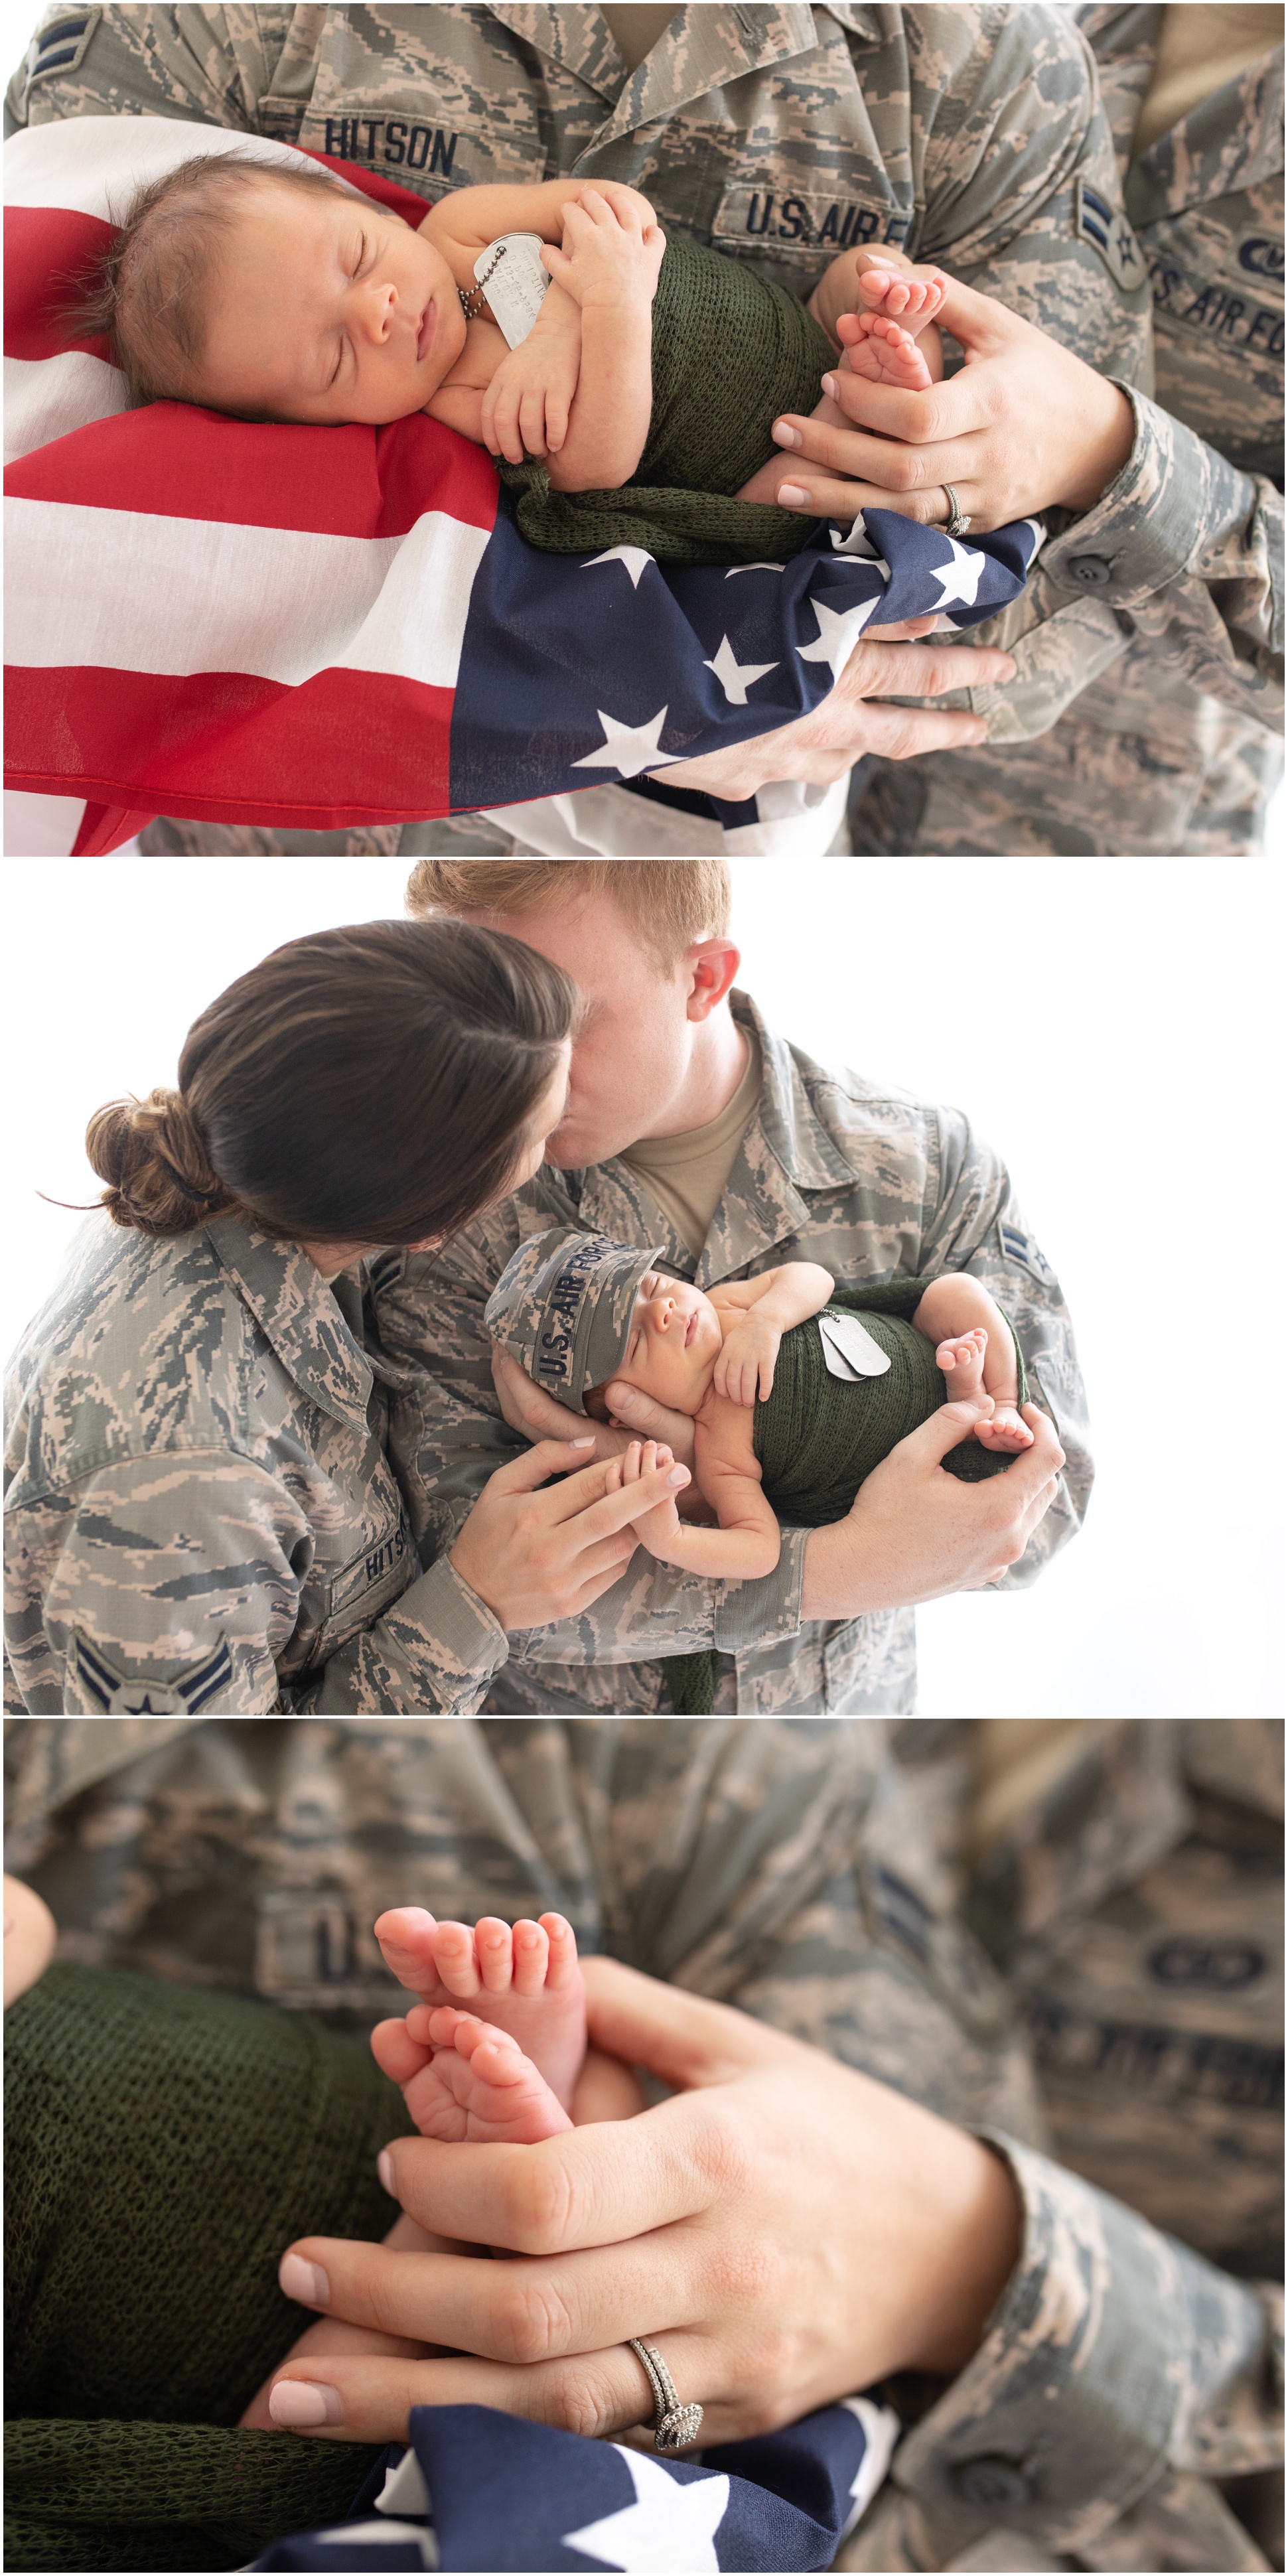 Family Photos from AZ Newborn Session in Air force Uniforms with Dog Tags